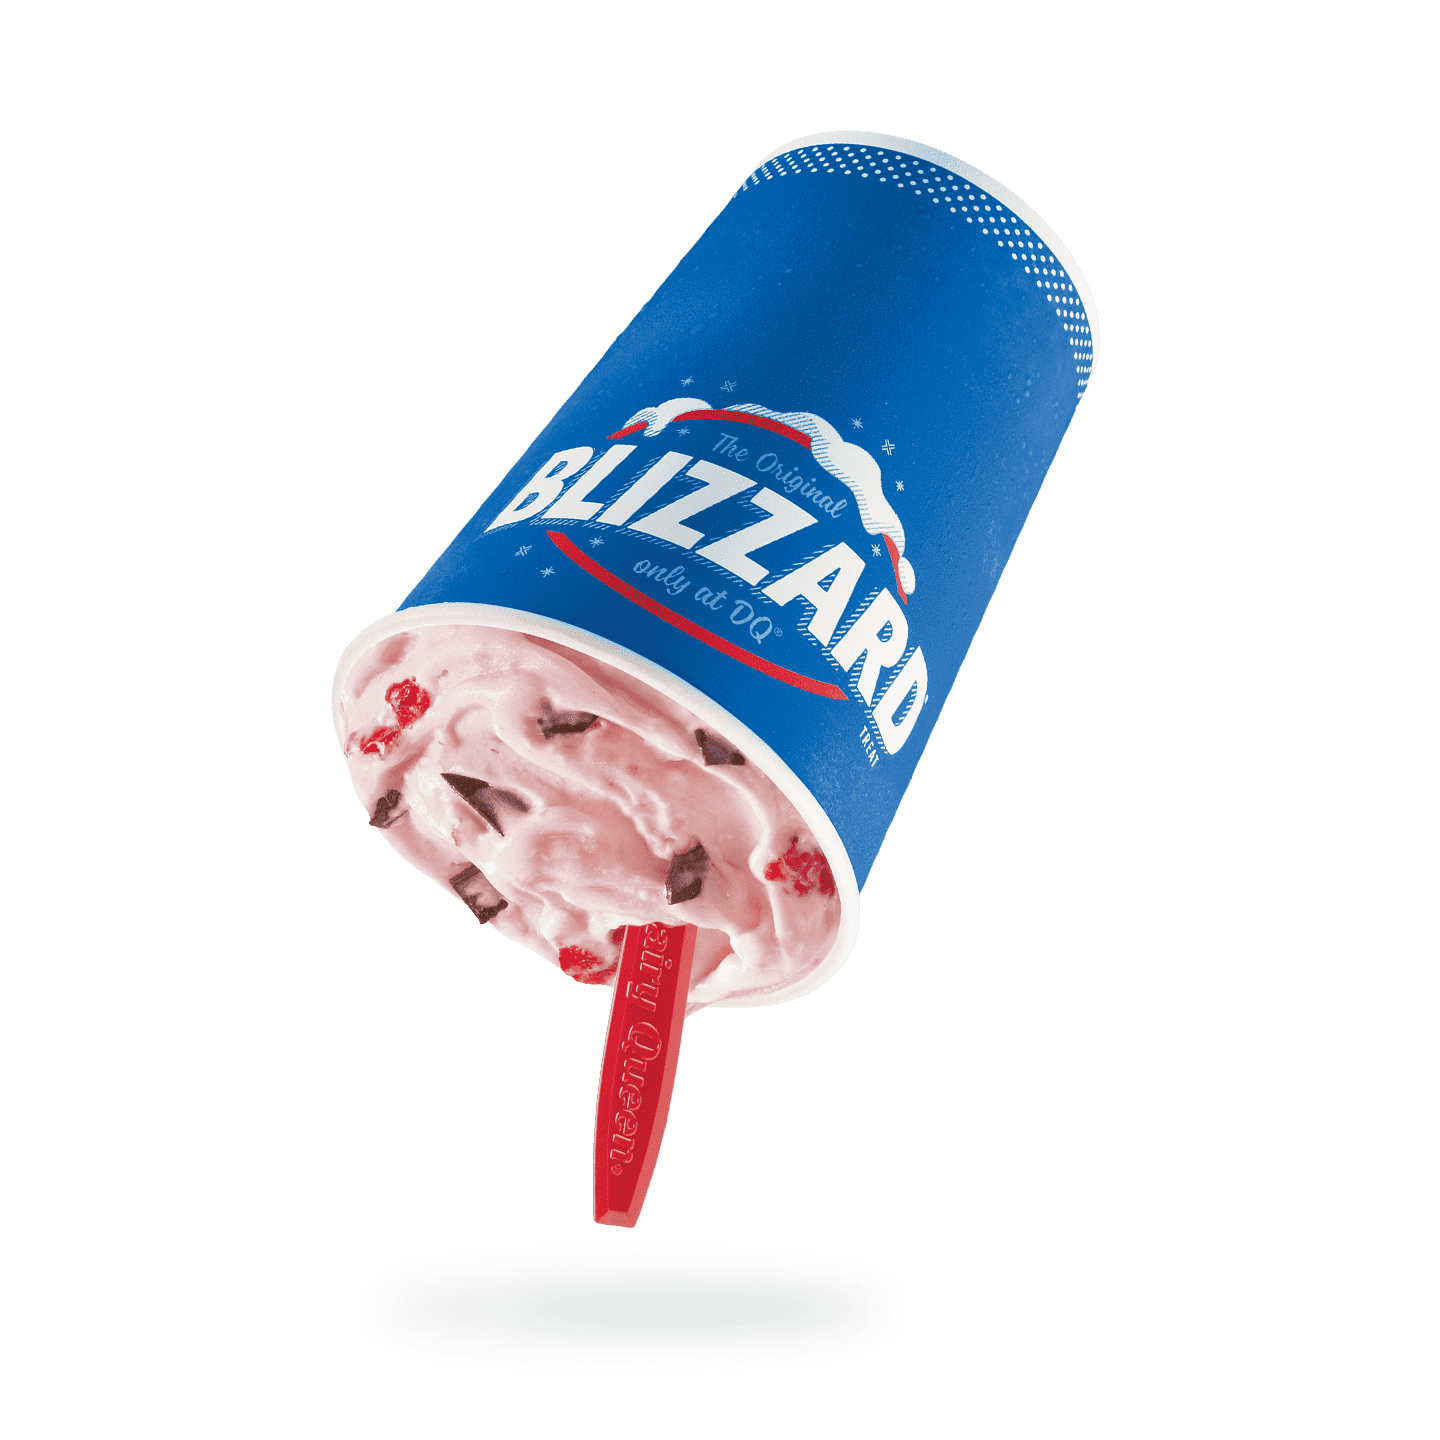 Dairy Queen outdoes themselves with a new treat